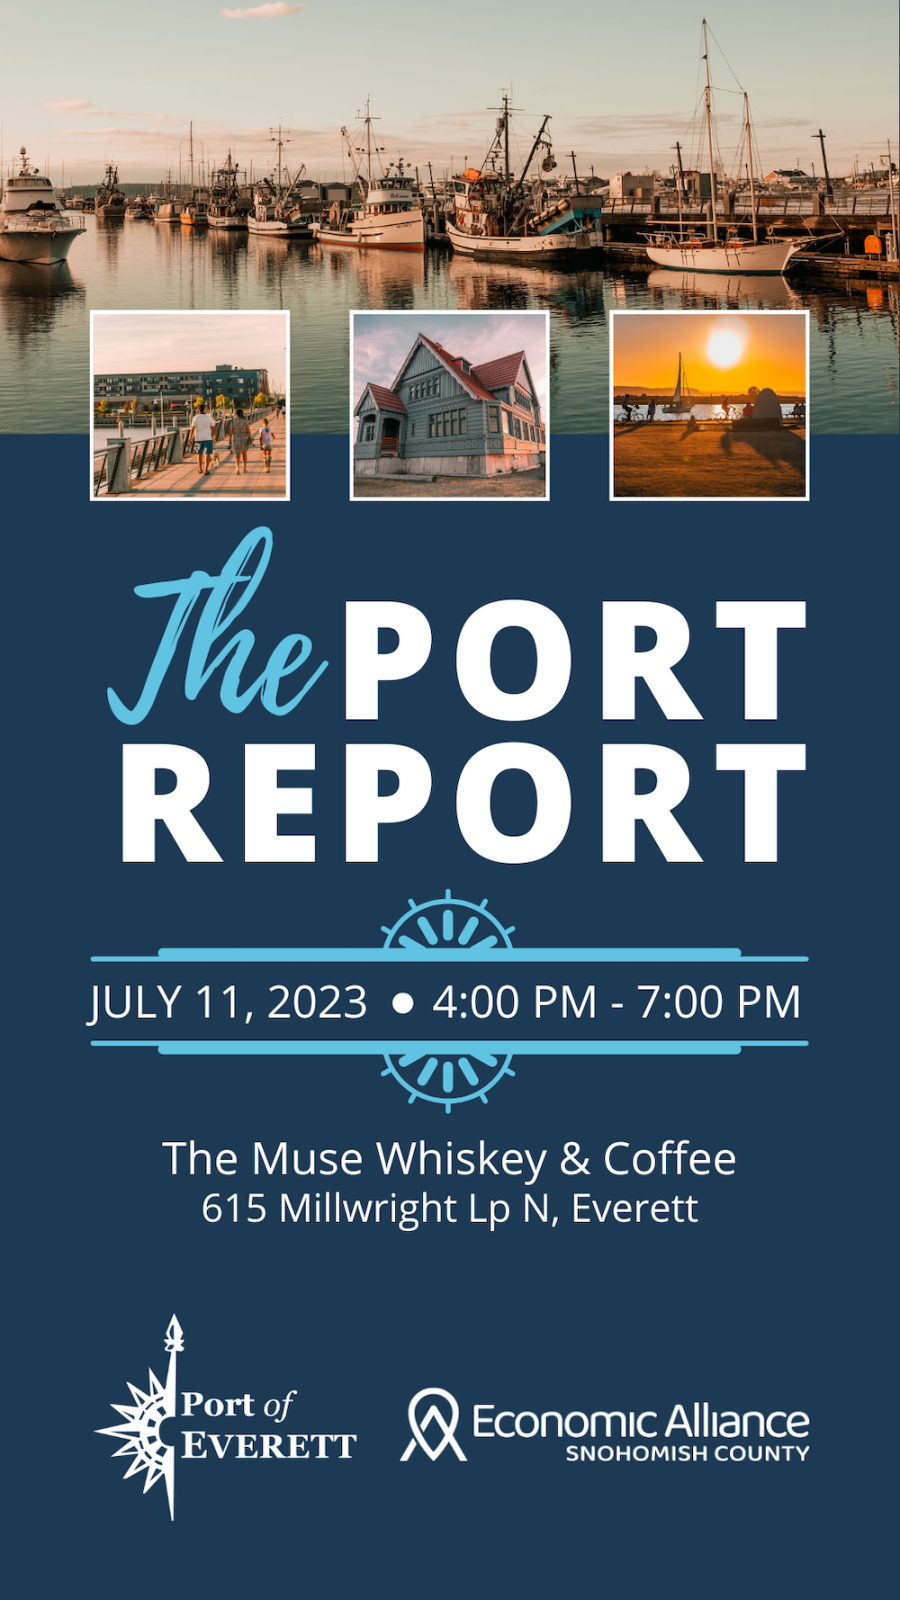 Annual Port Report Coming to Everett Waterfront on July 11 Photo